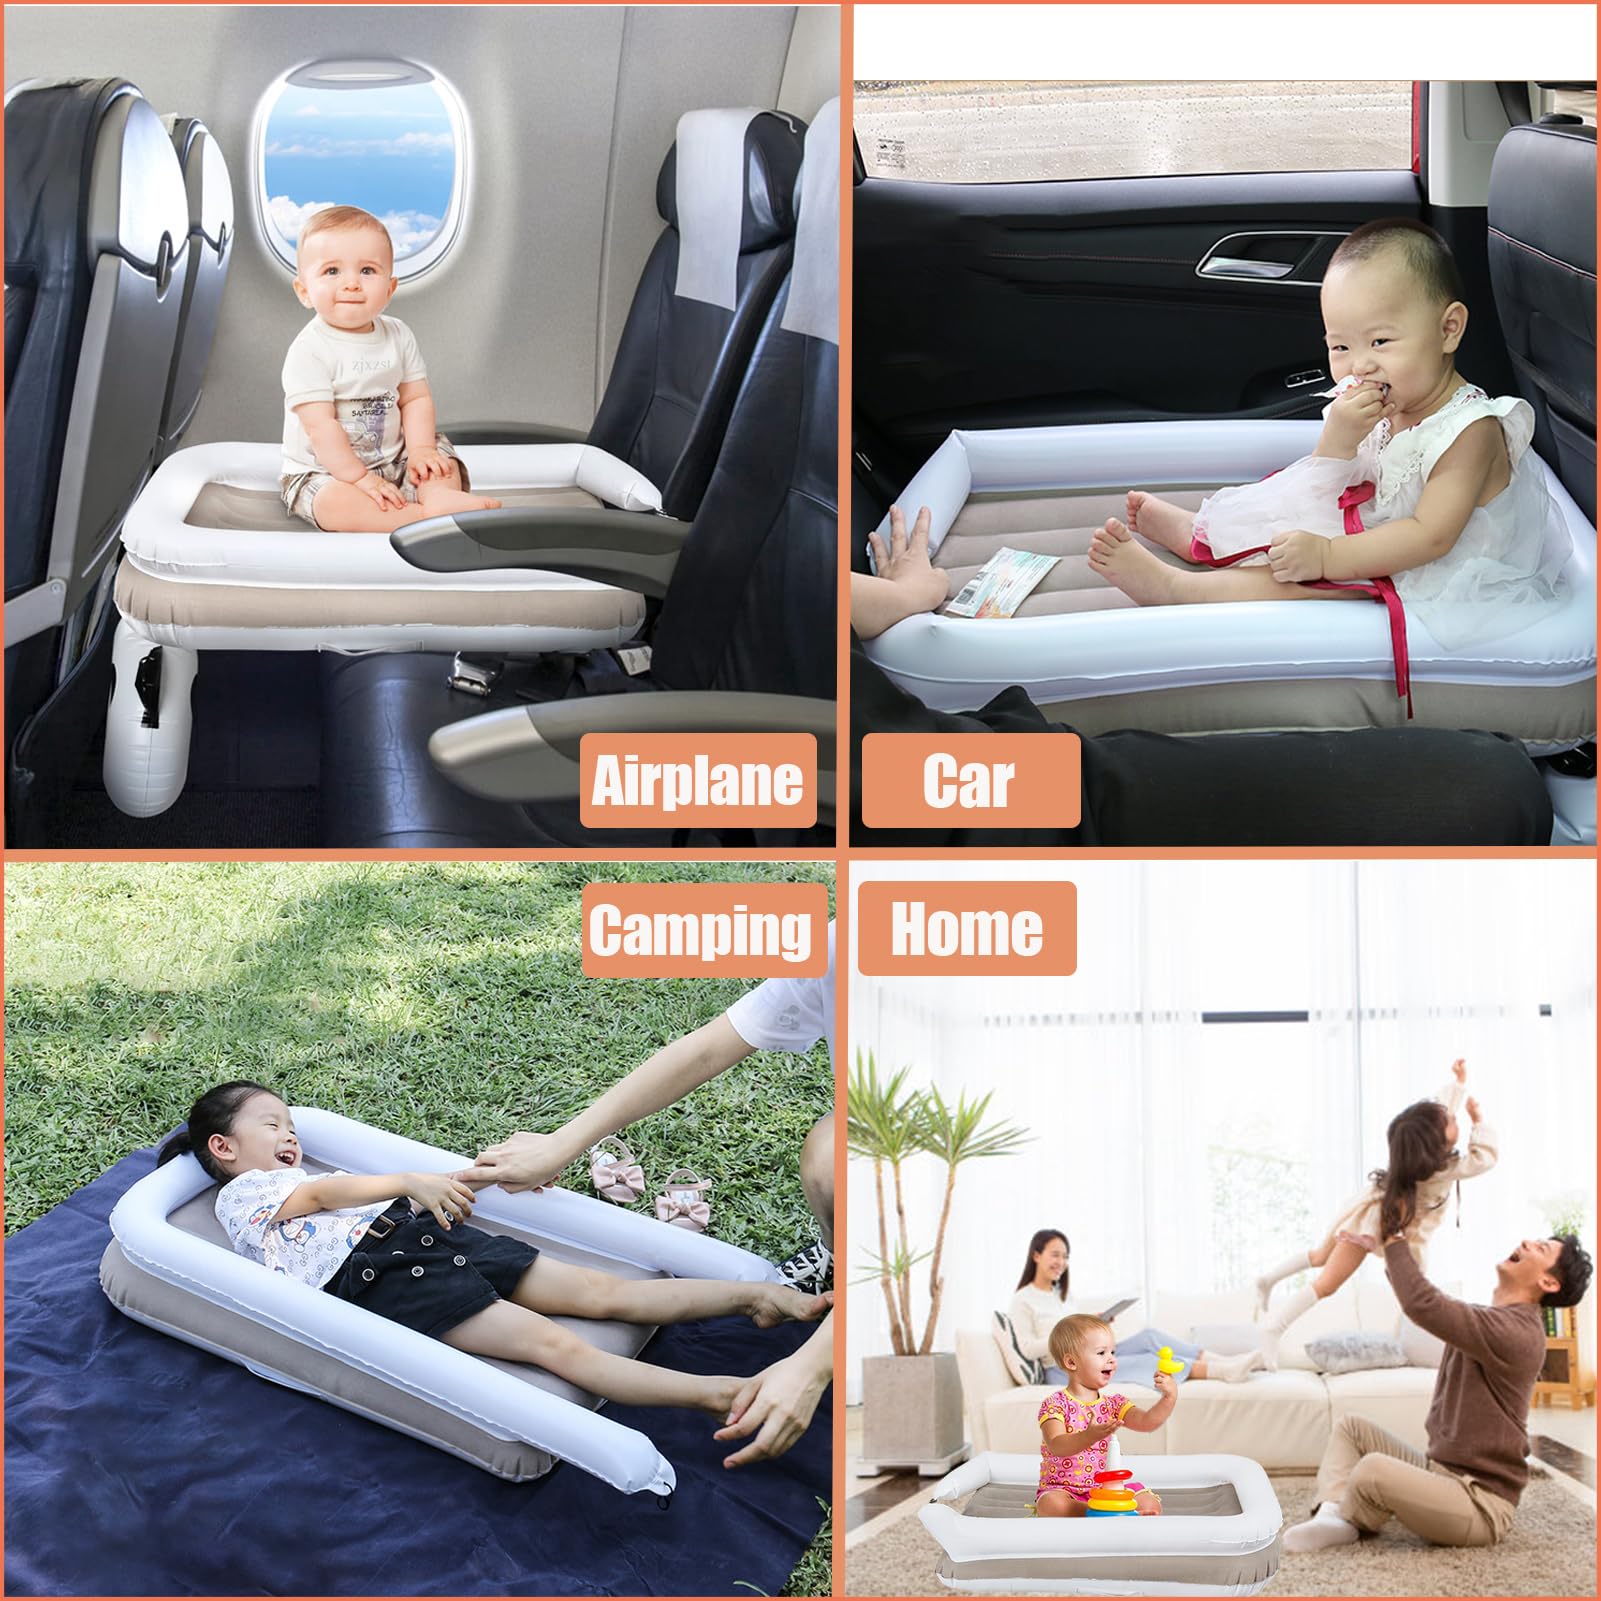 Gloserin Inflatable Toddler Travel Bed-Portable Toddler Bed,Plane Bed for Kids,Airplane Travel Beds with Sides for Kids Camping Air Mattress Blow Up Mattress for Camping Trave